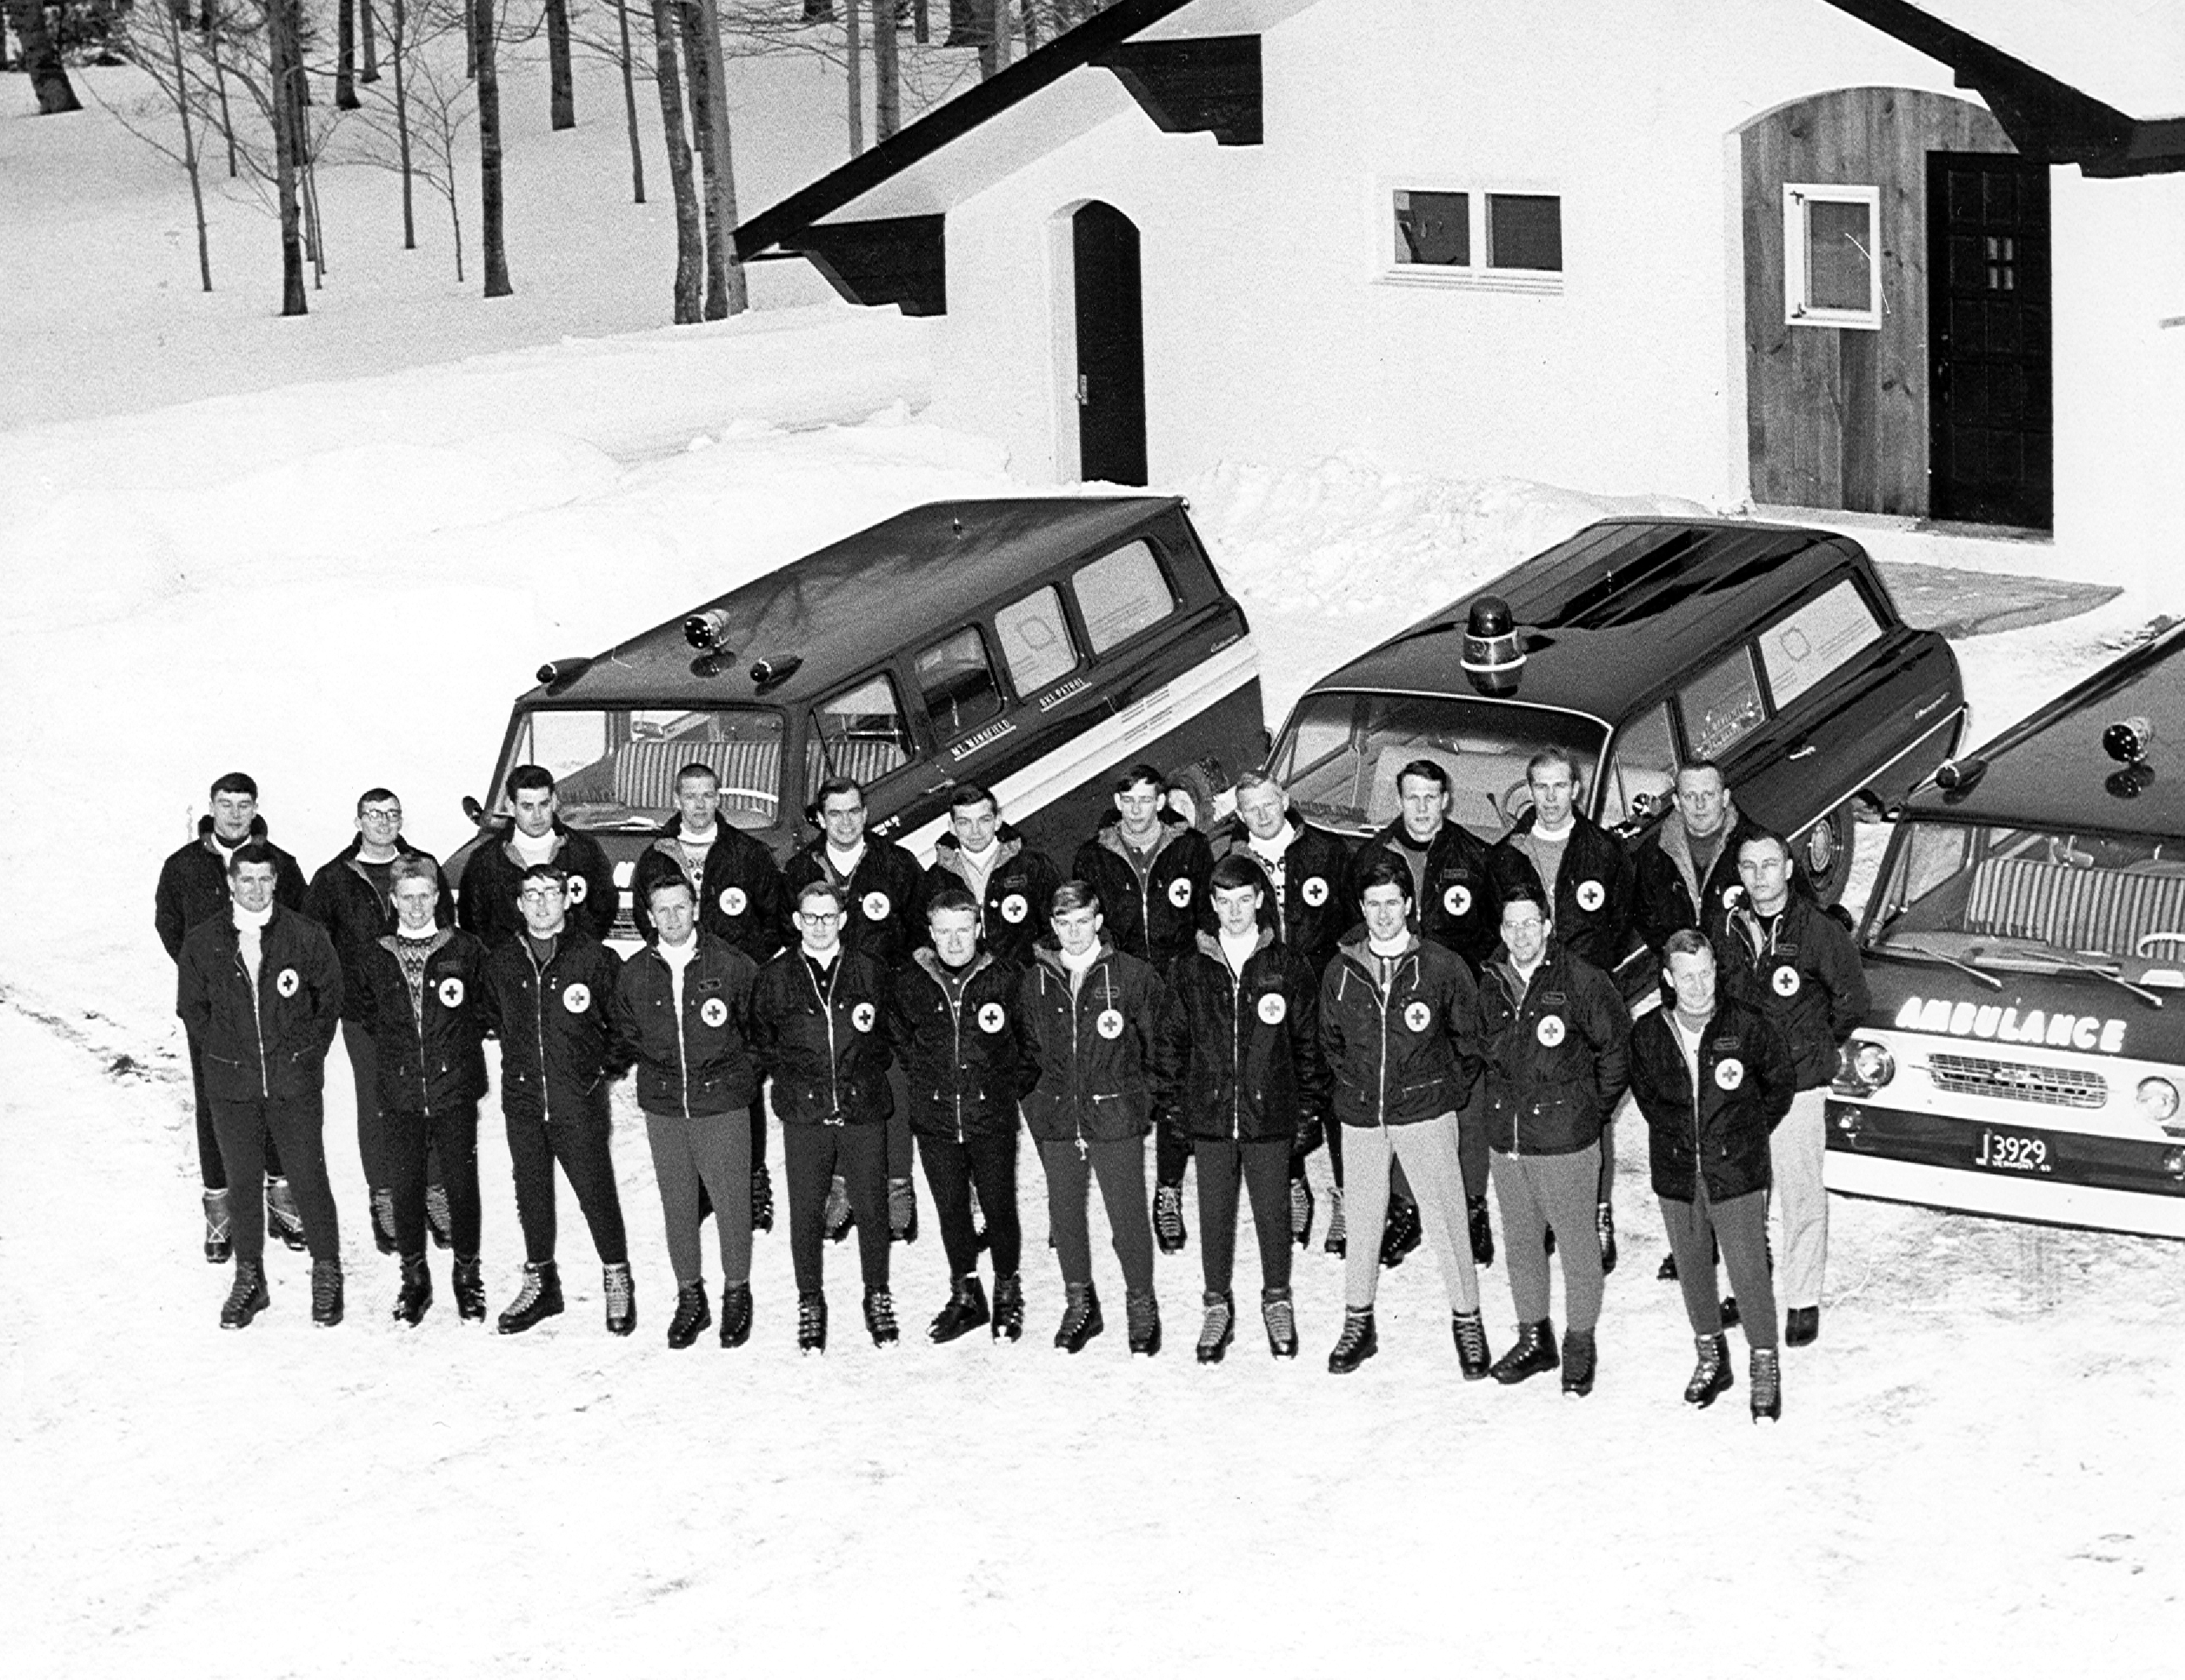 Stowe historic patrol group at base with vehicles